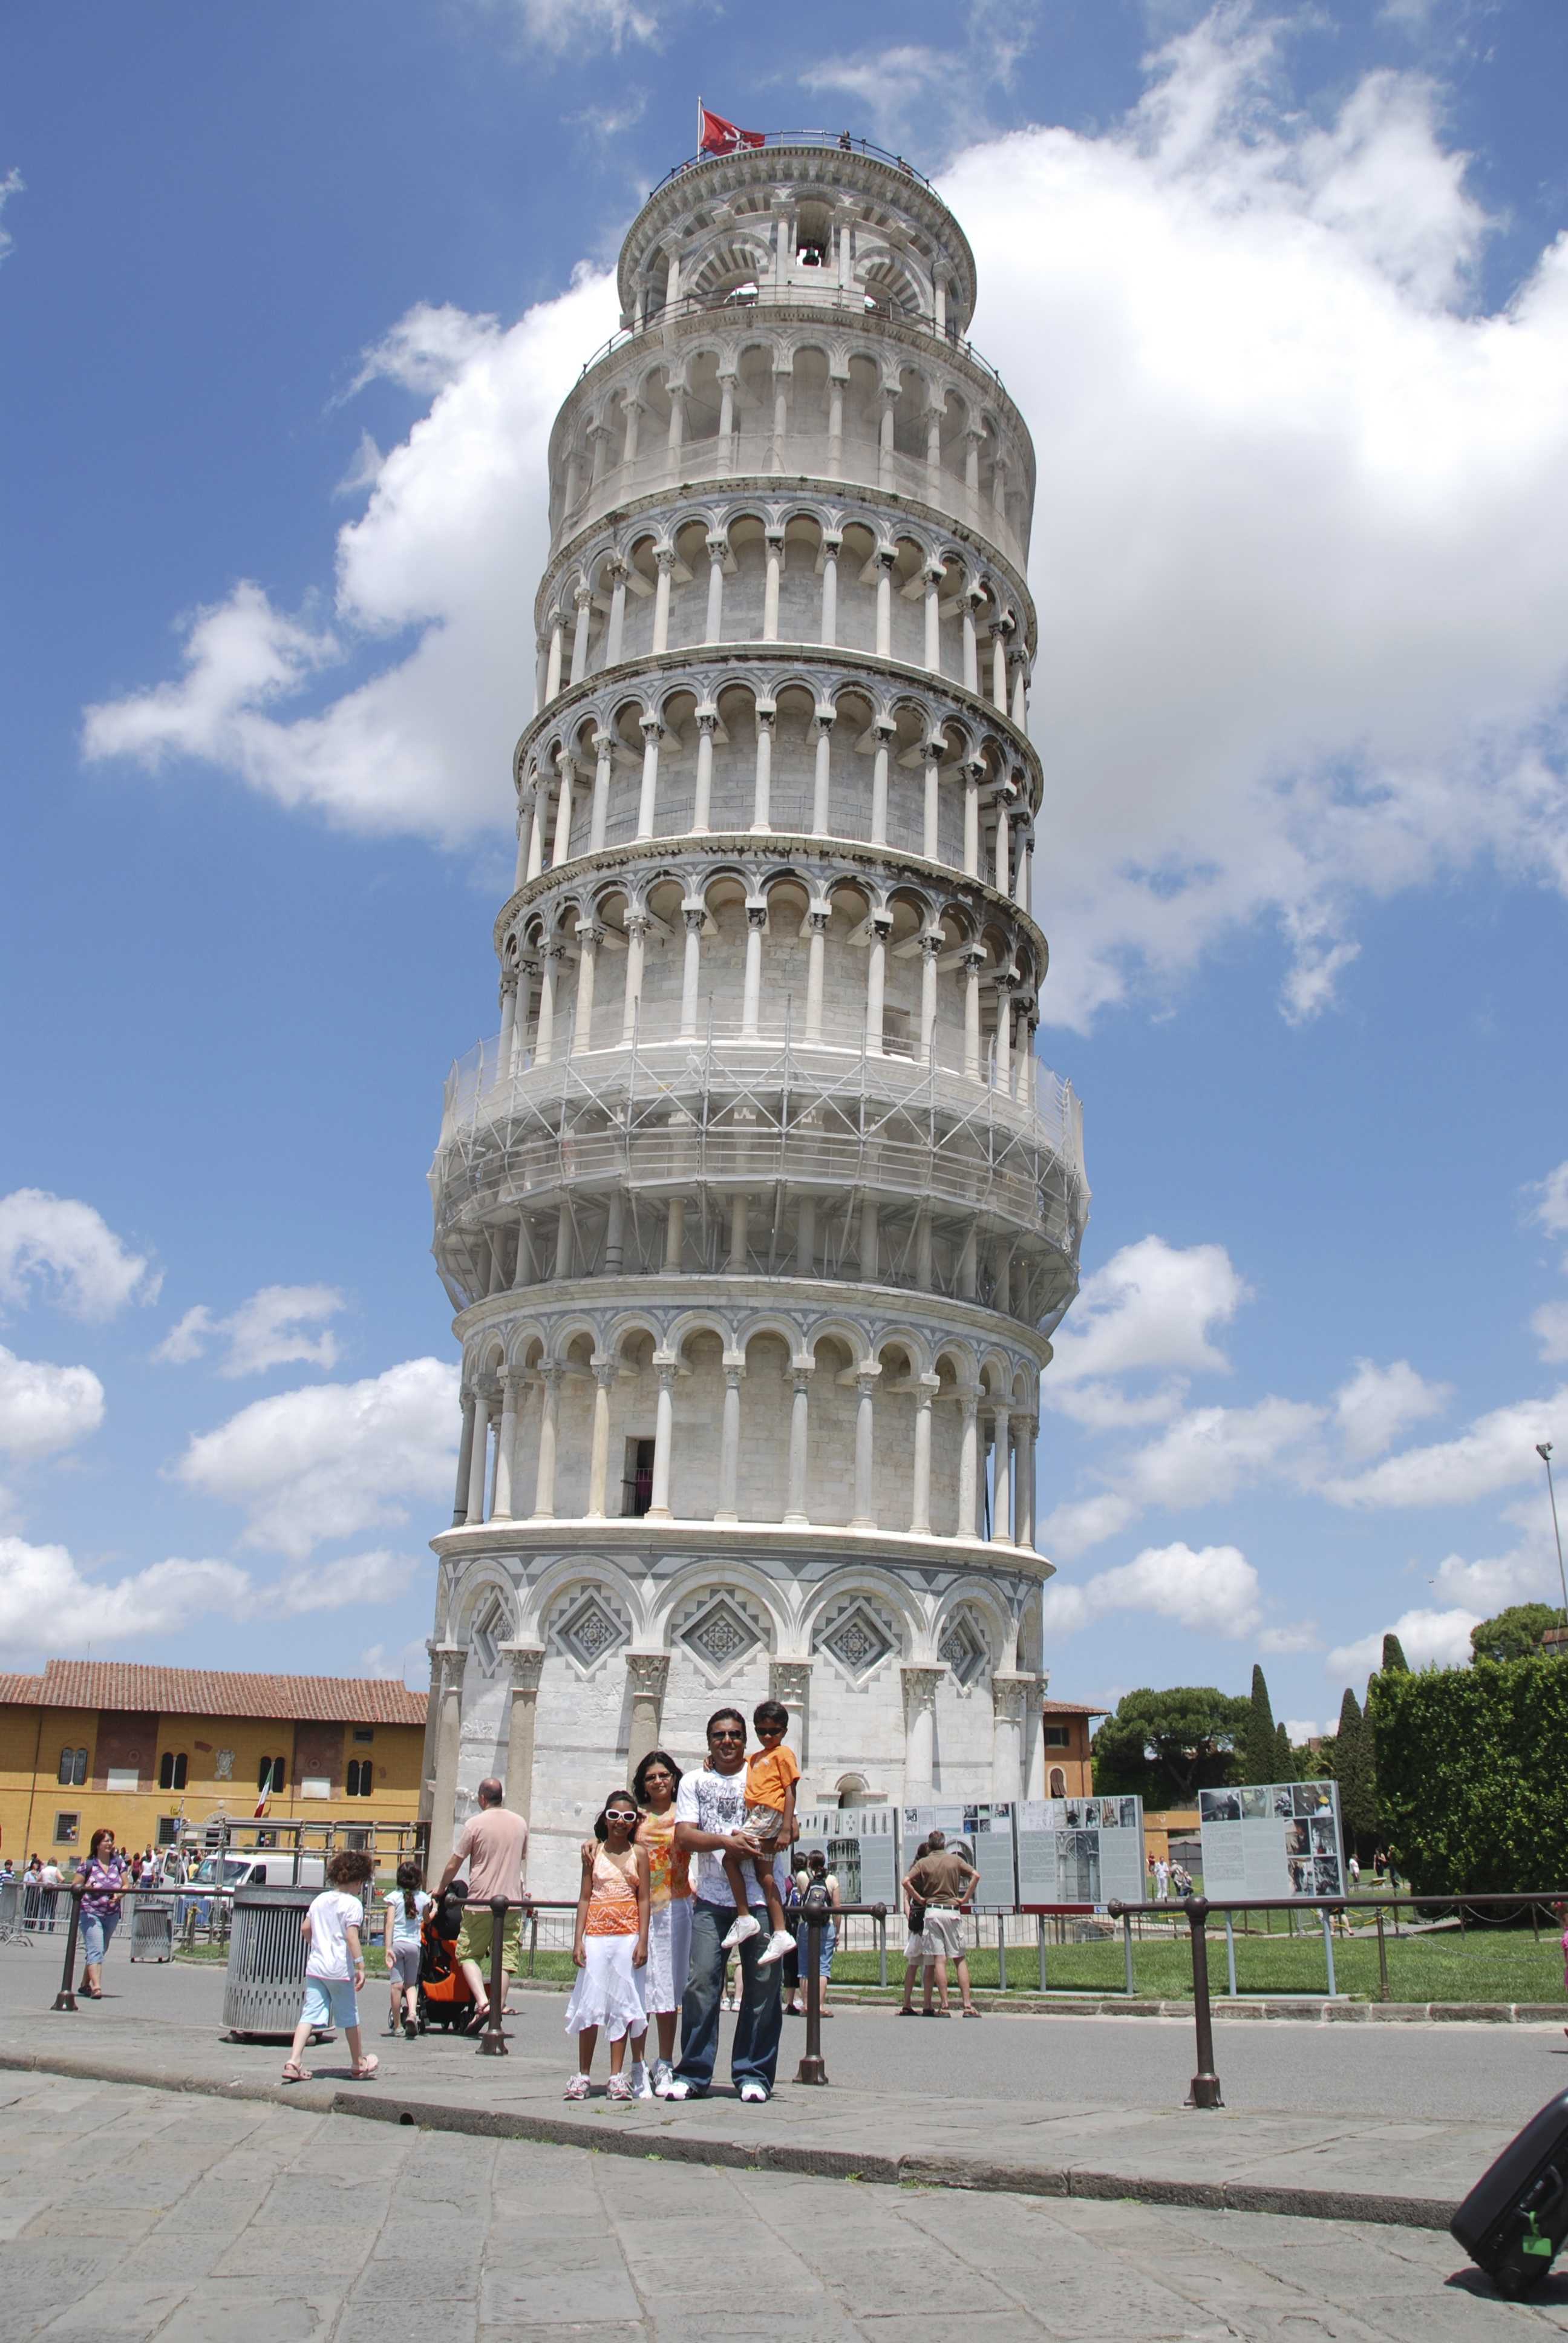 Leaning tower of Pisa - Day trip to Pisa from Florence #OutsideSuburbia